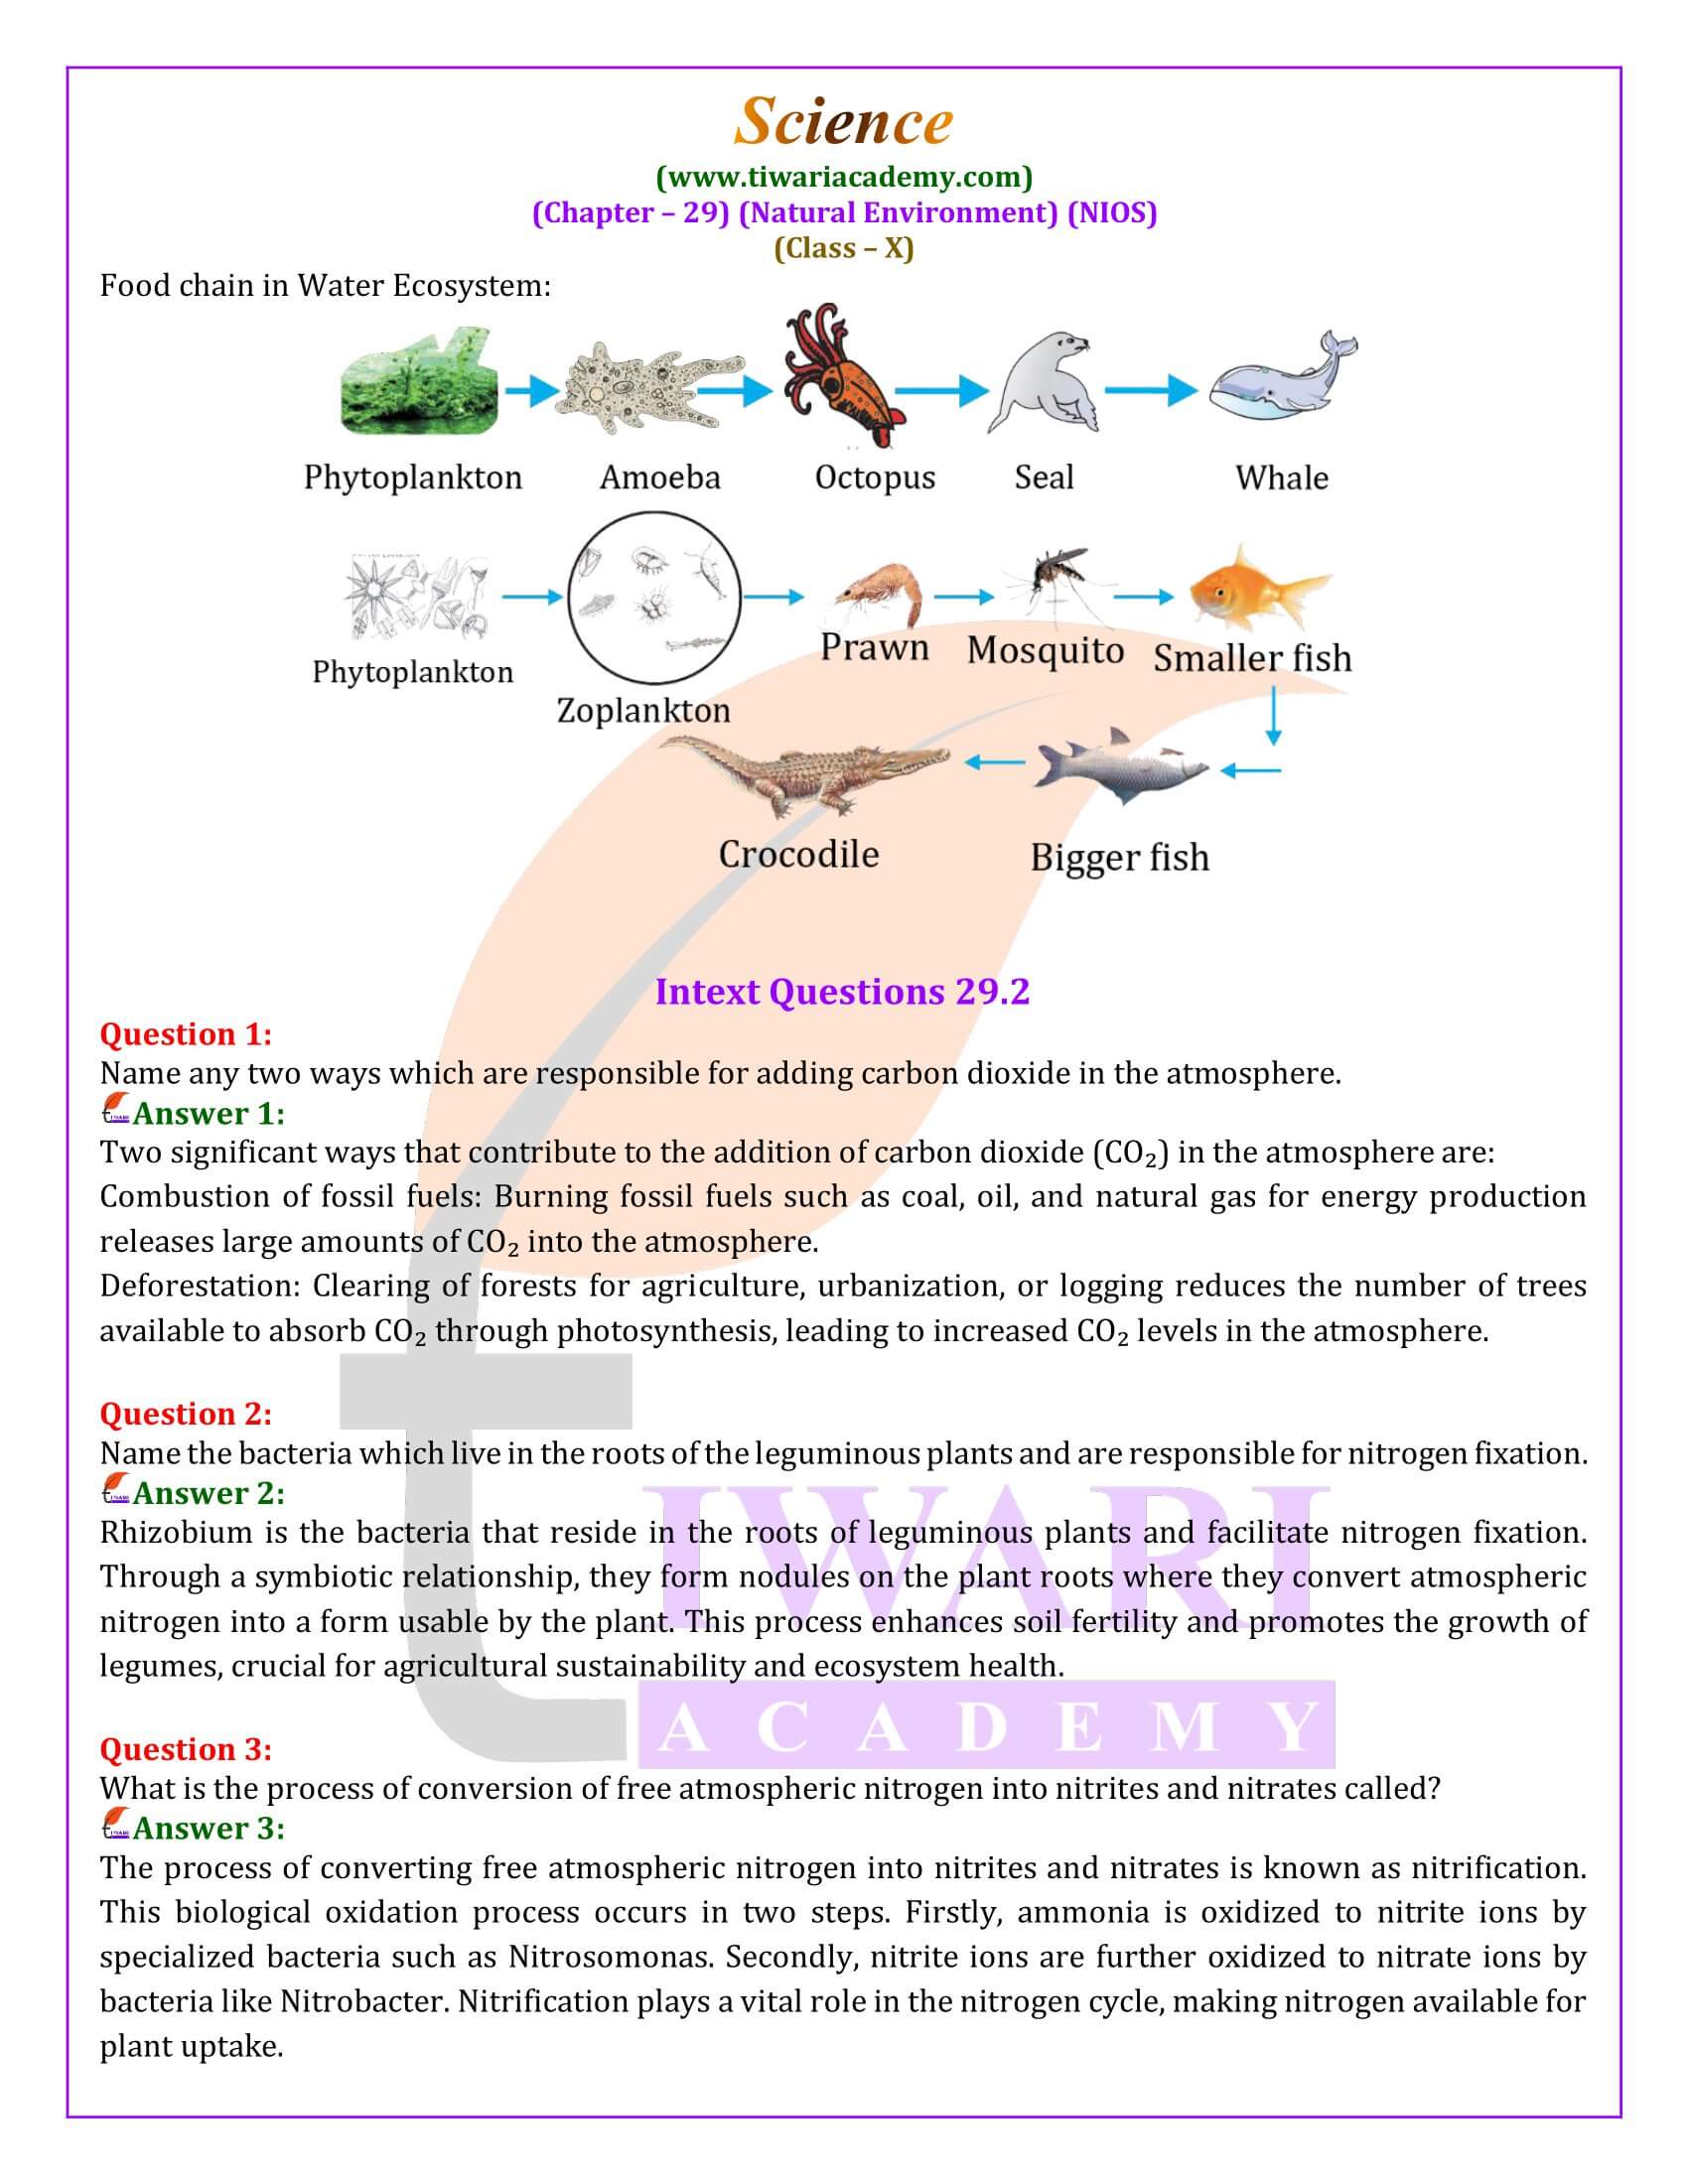 NIOS Class 10 Science Chapter 29 Natural Environment Solutions